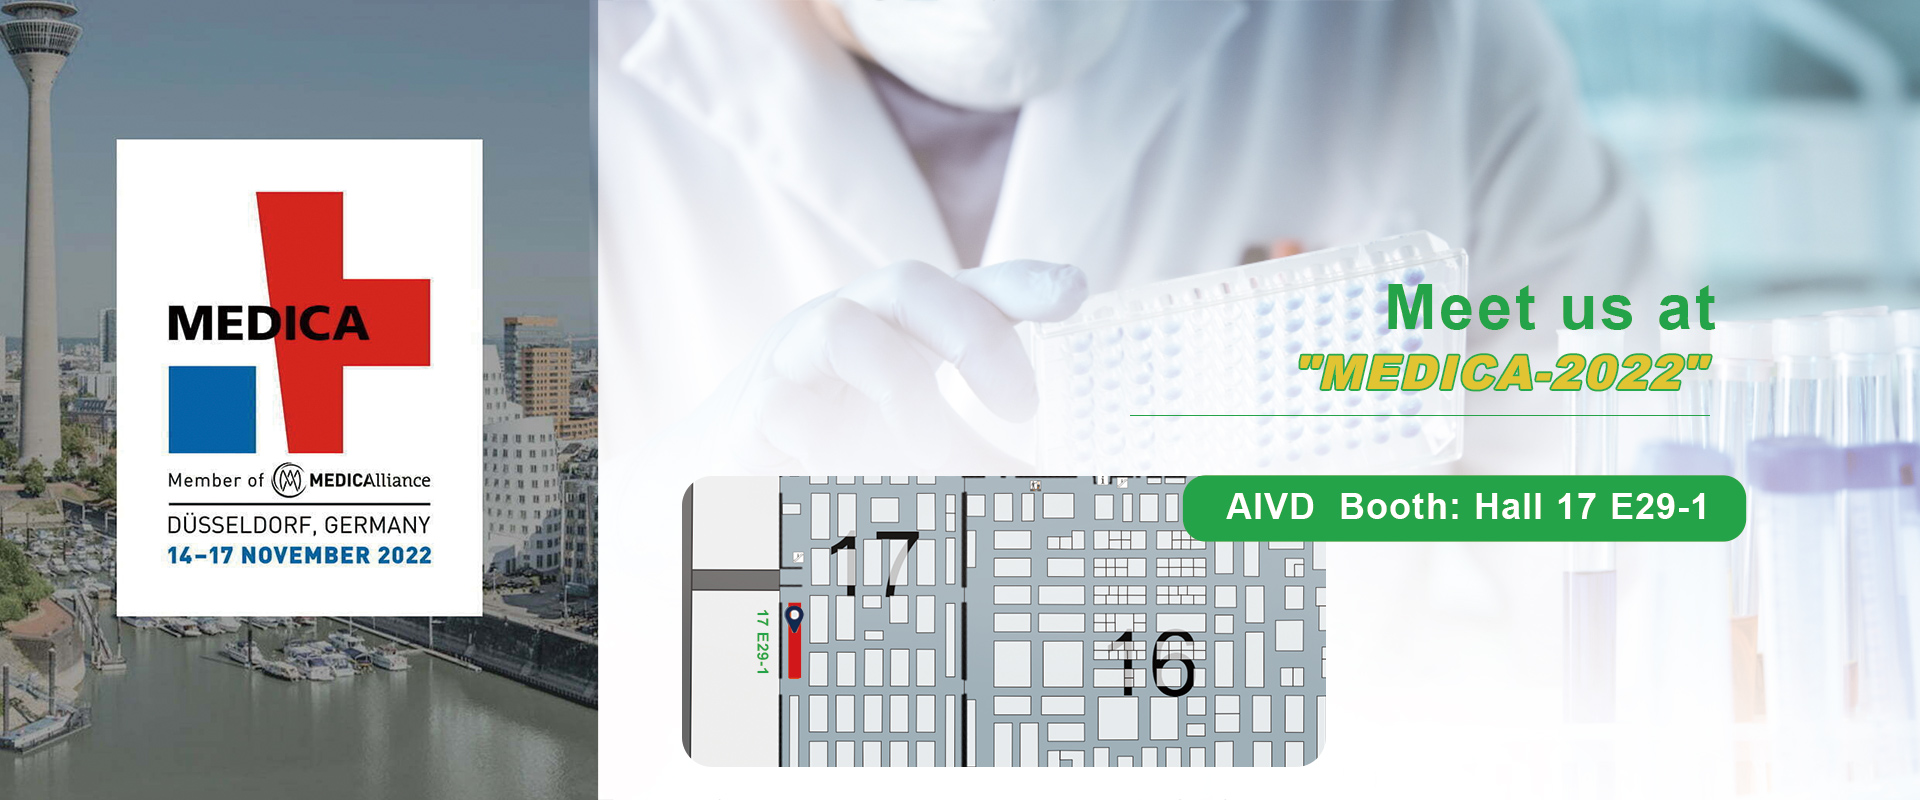 Make an Appointment with AIVD at MEDICA 2022